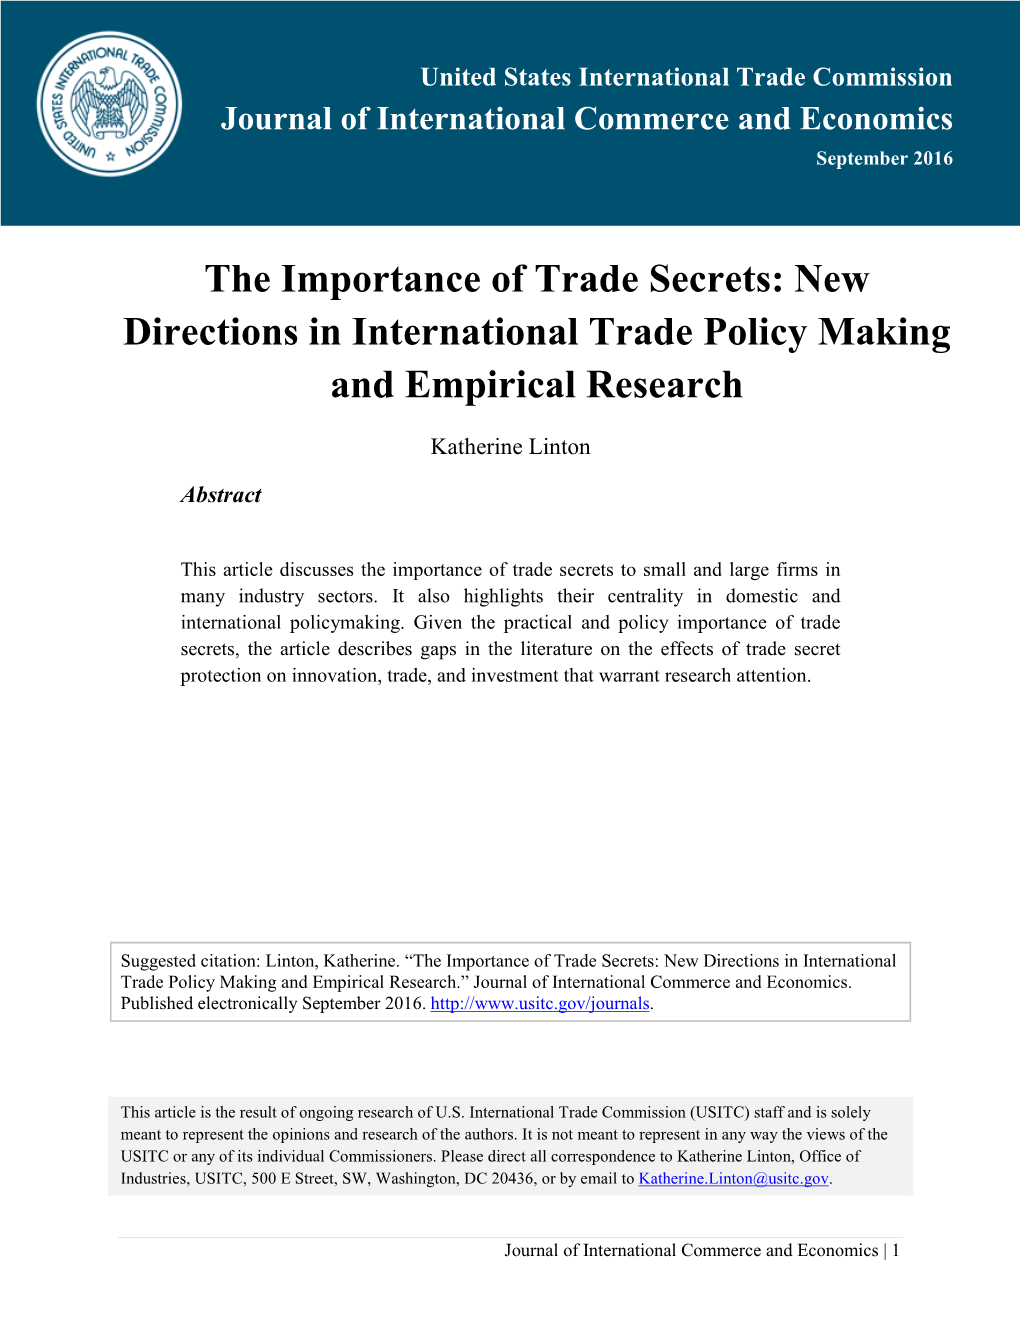 The Importance of Trade Secrets: New Directions in International Trade Policy Making and Empirical Research